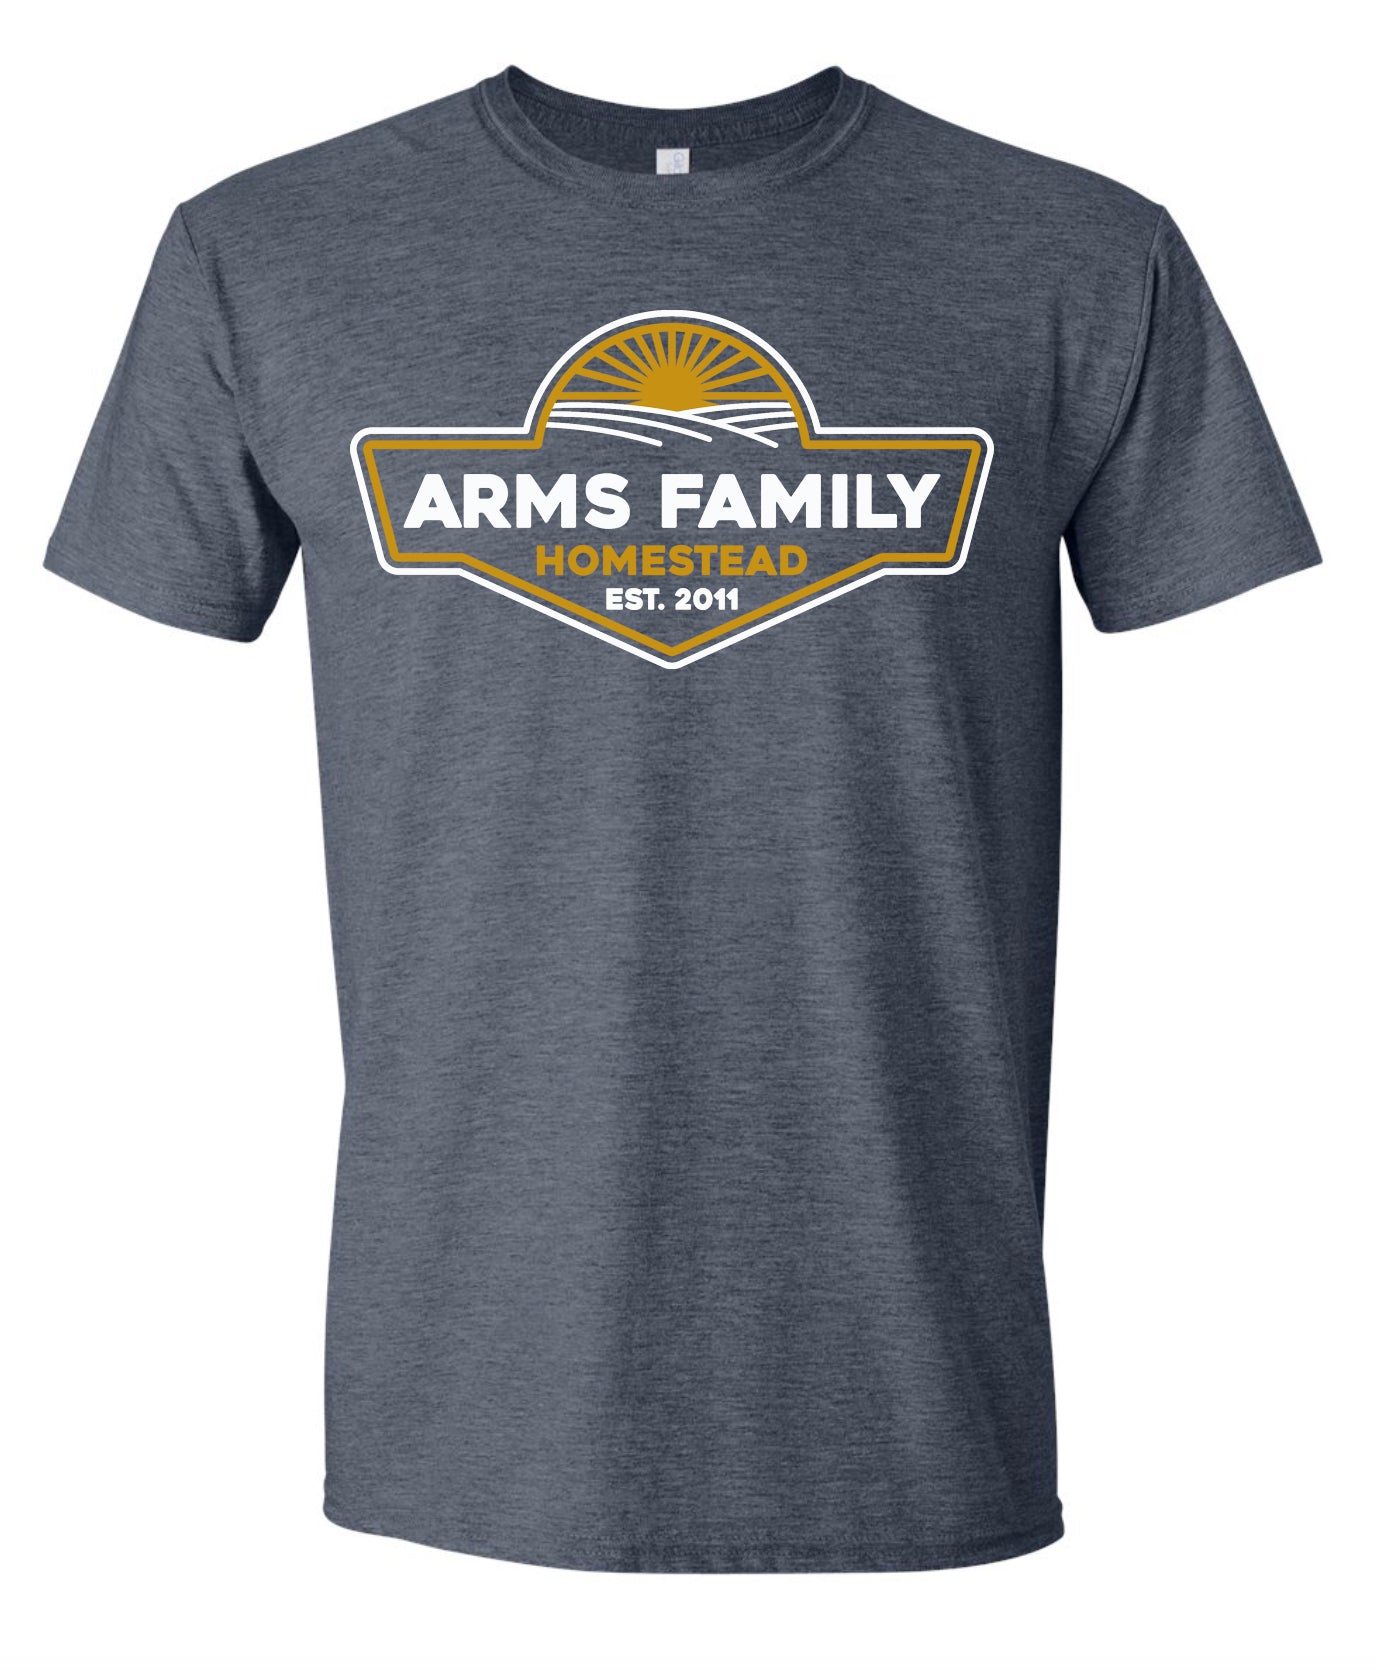 ARMS FAMILY HOMESTEAD T-SHIRT